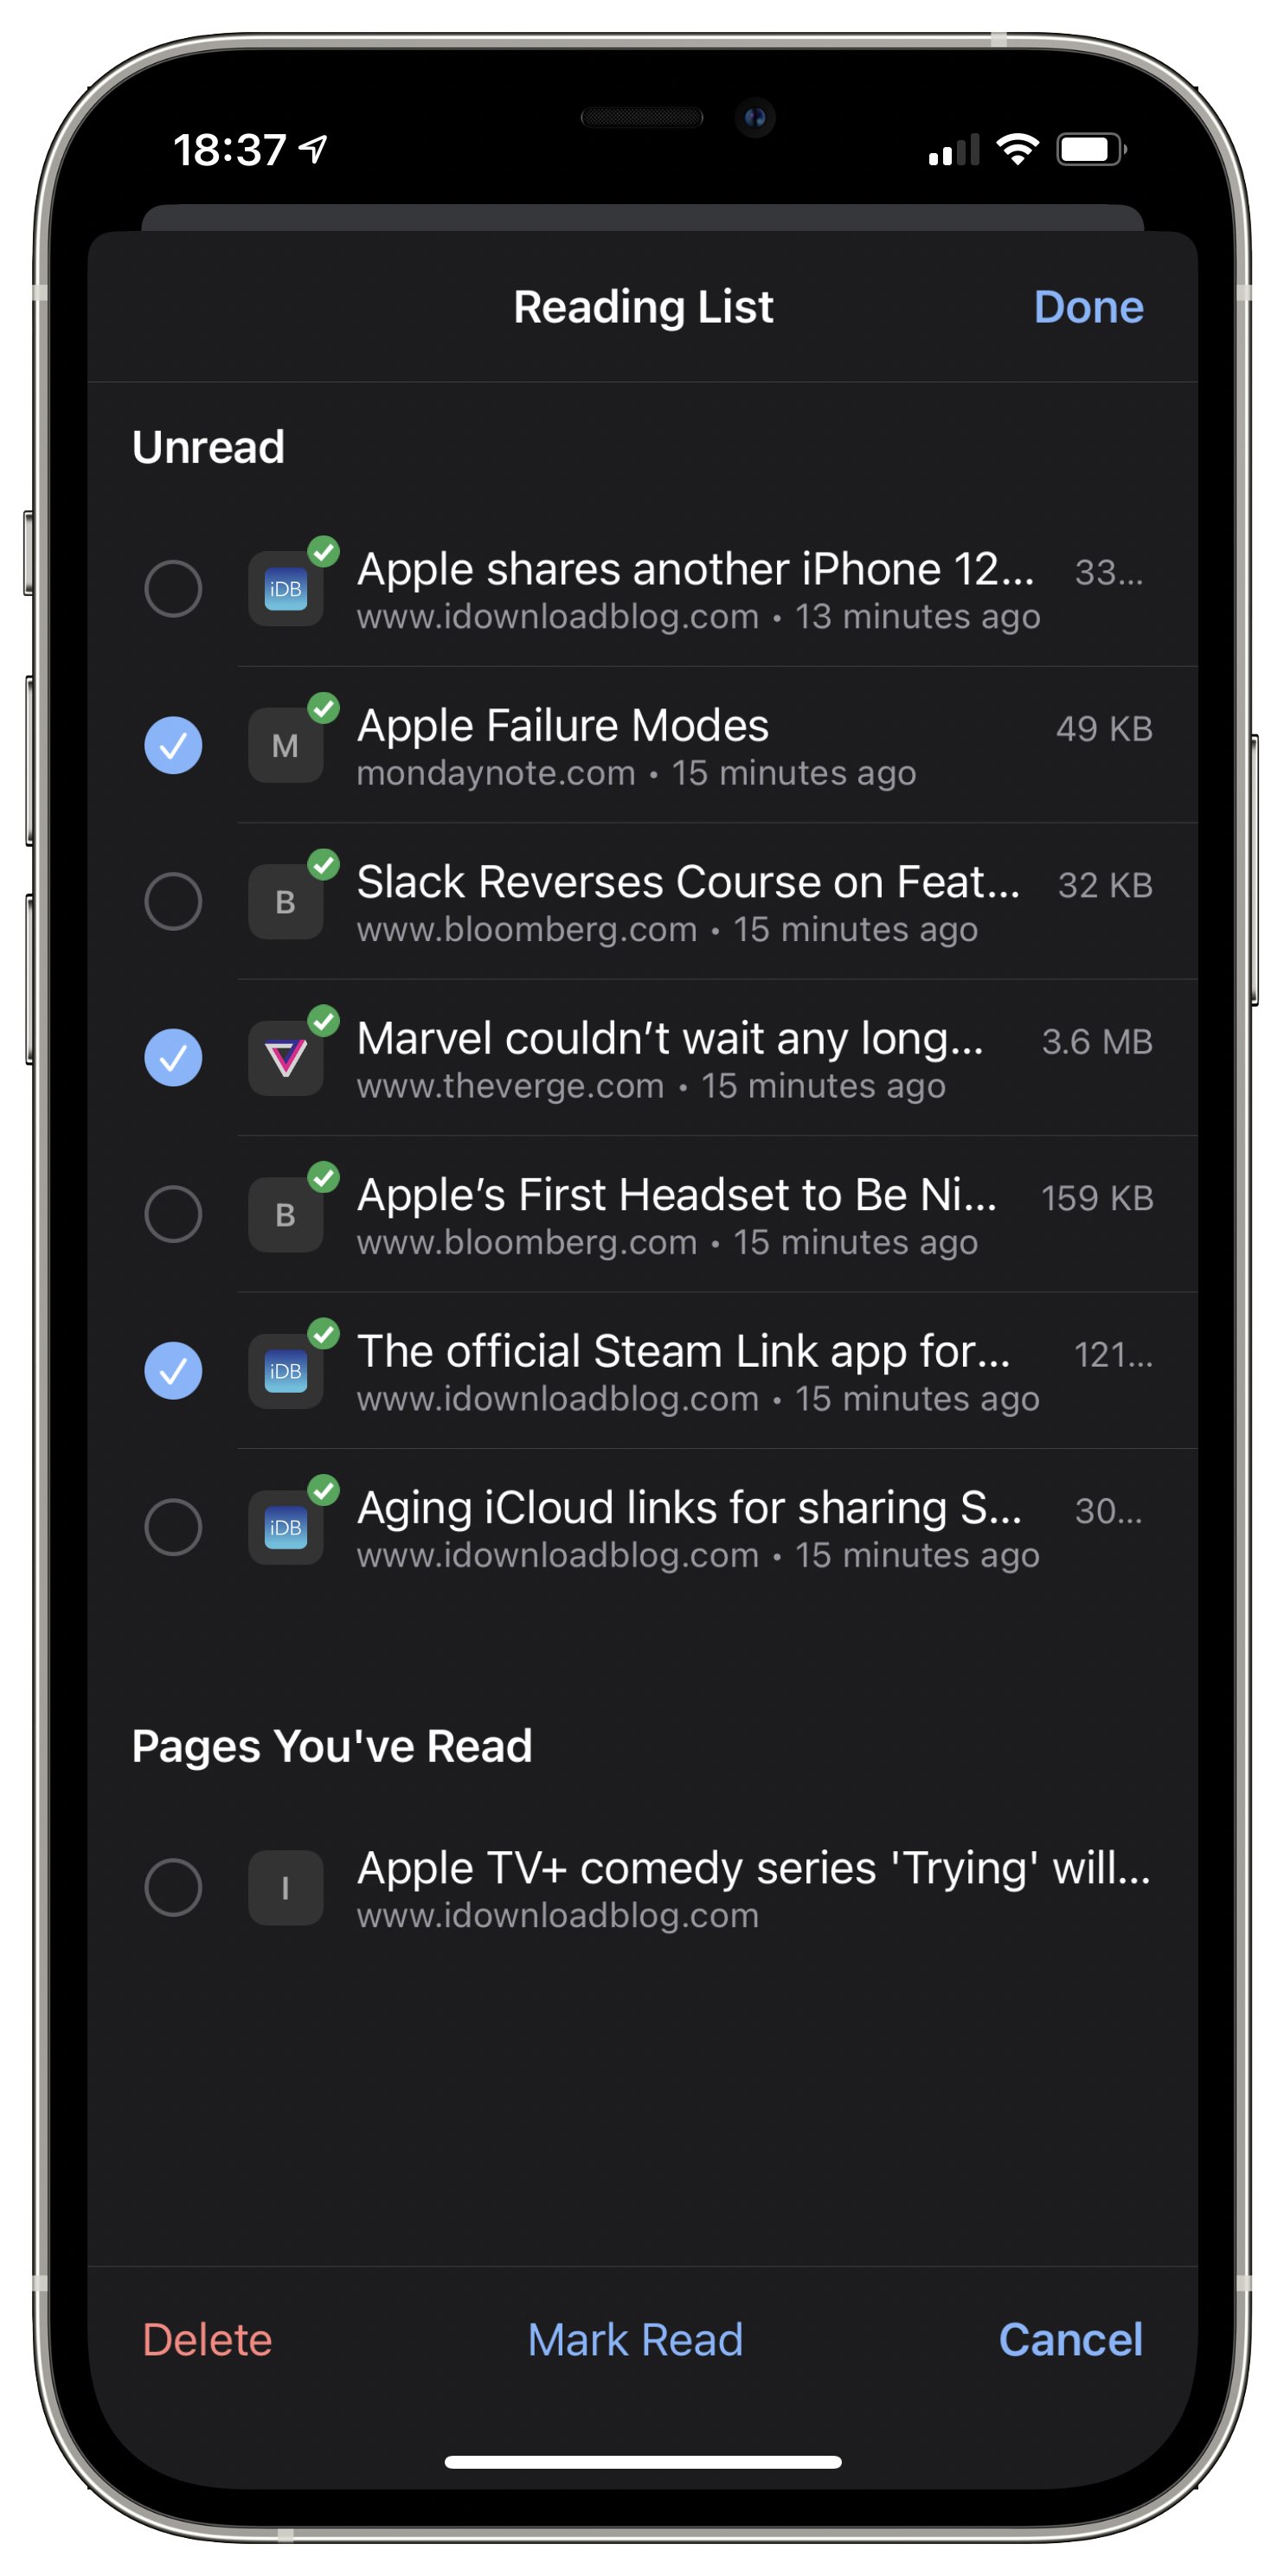 An iOS 14 screenshot illustrating Reading List management in the Google Chrome browser with the Add to Reading List option on the iPhone